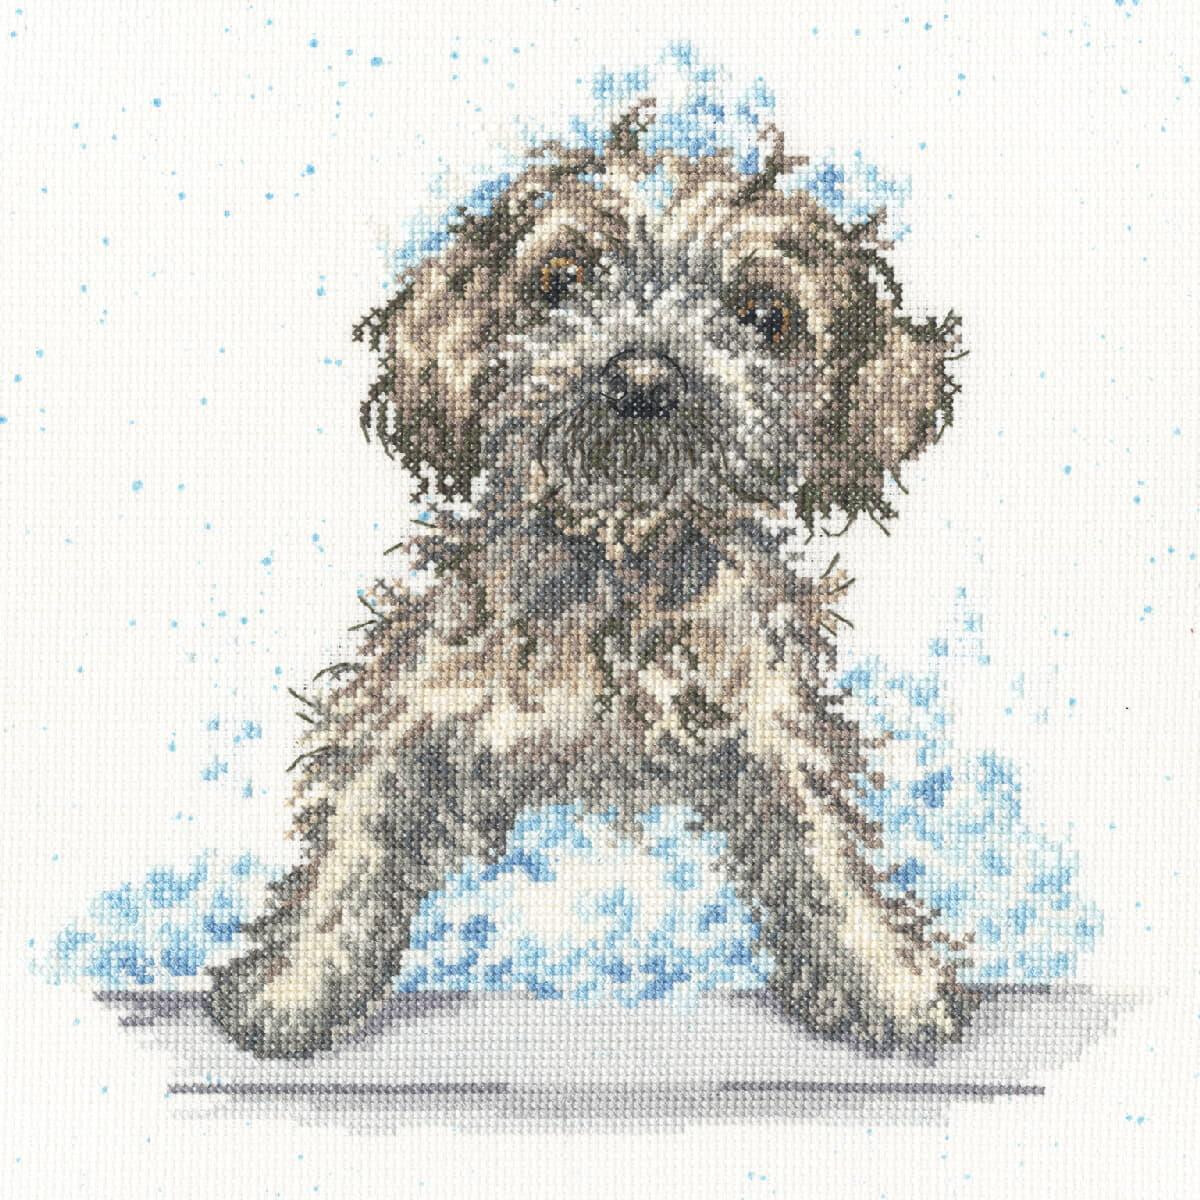 A detailed embroidery pack artwork of a small, fluffy dog...